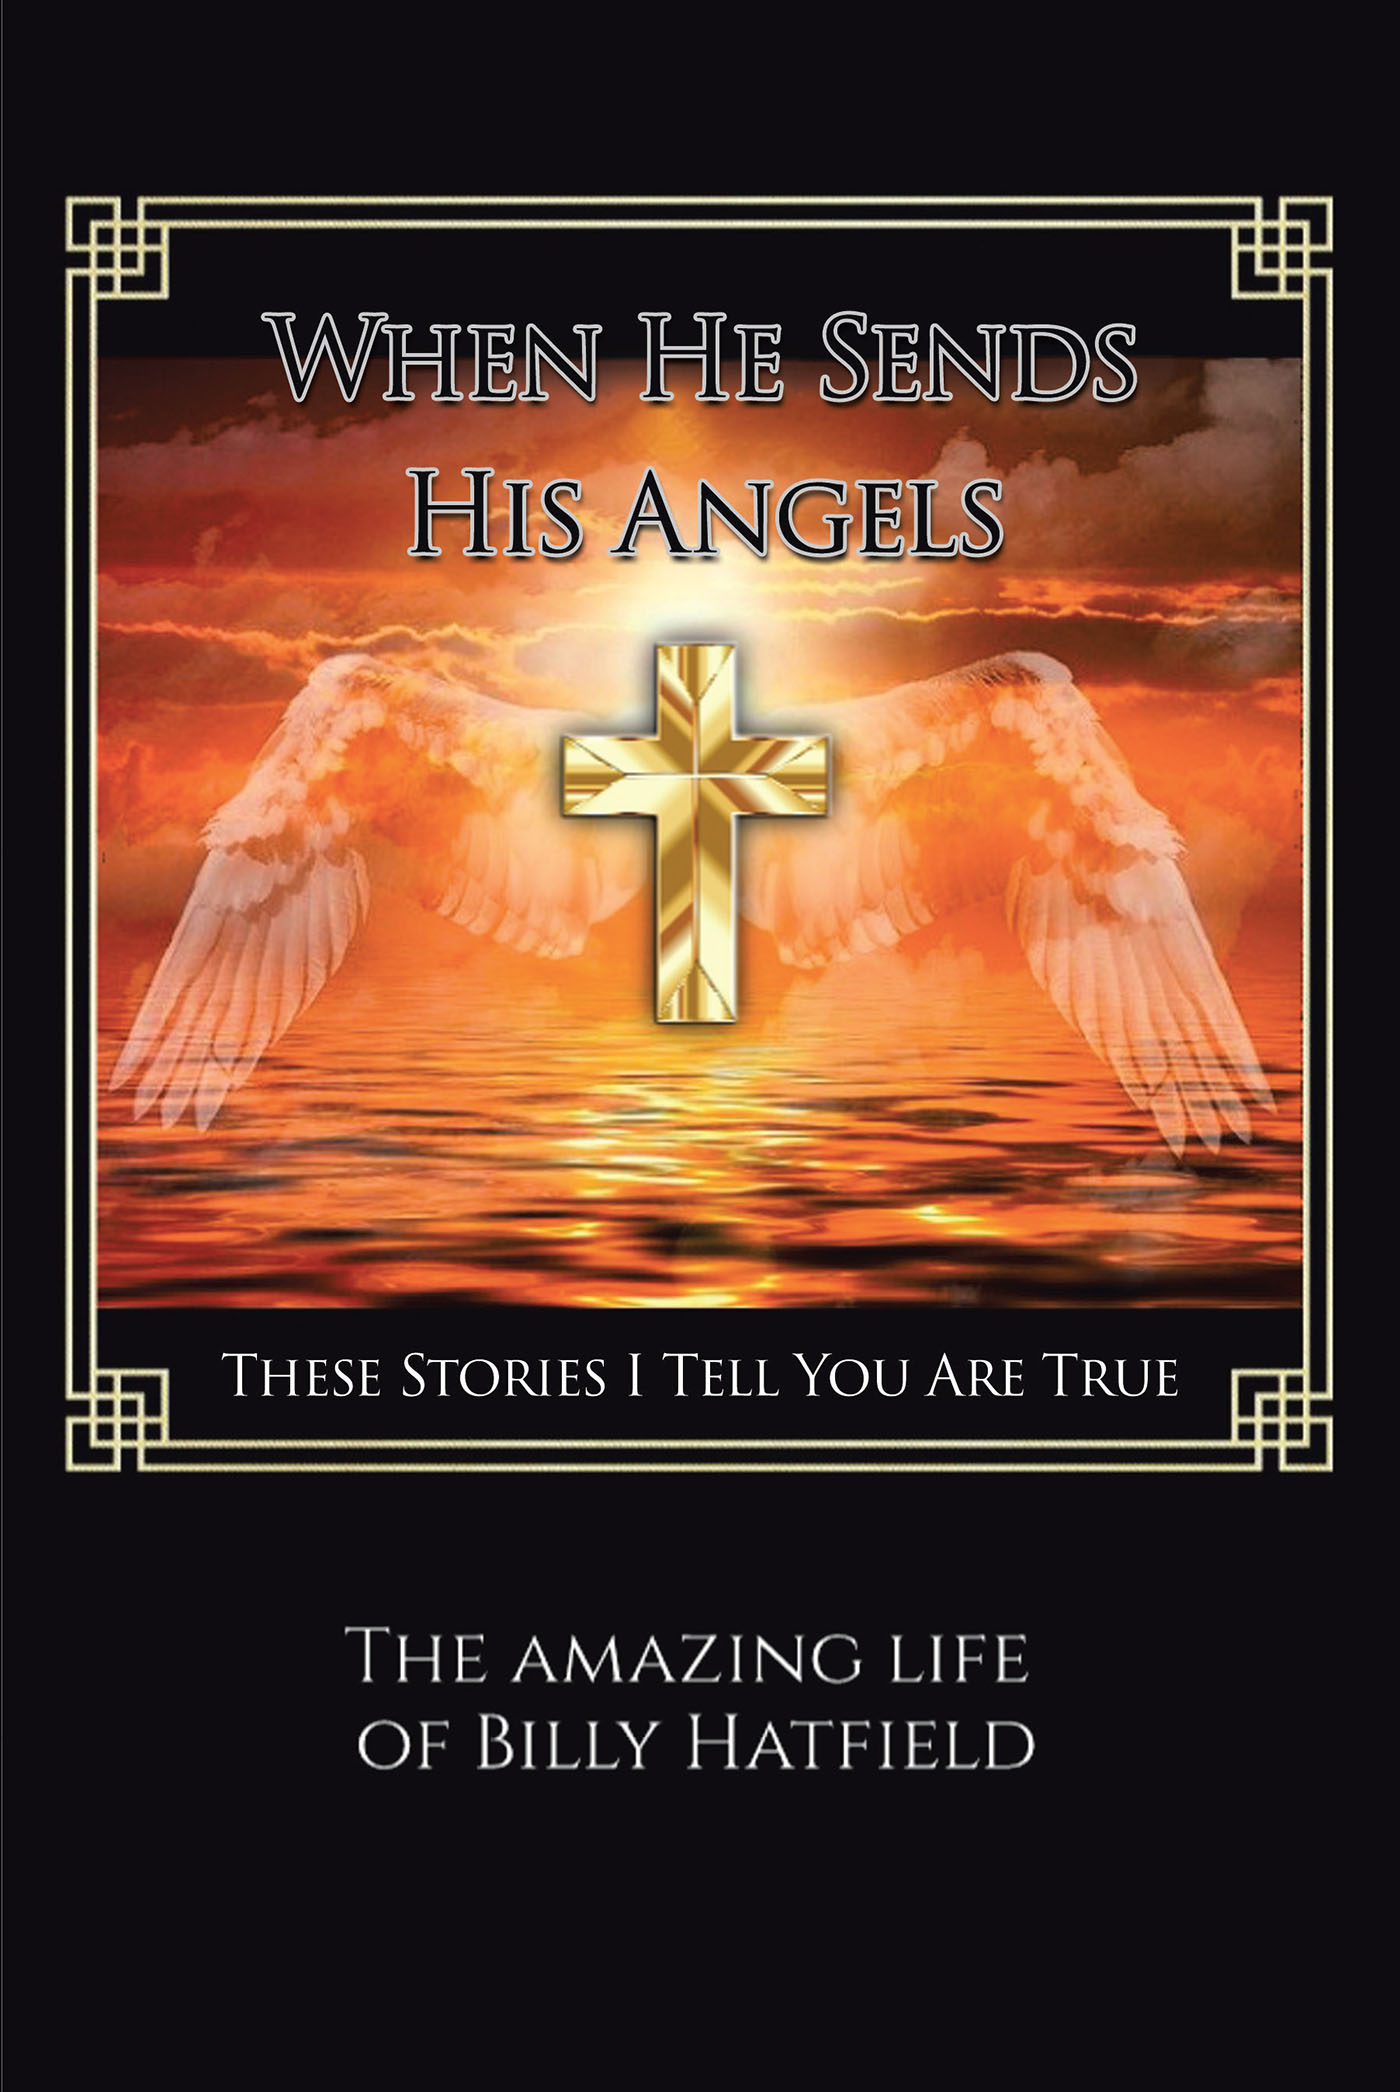 Billy Hatfield’s Newly Released "When He Sends His Angels" is a Concise and Inspiring Collection of Personal Stories